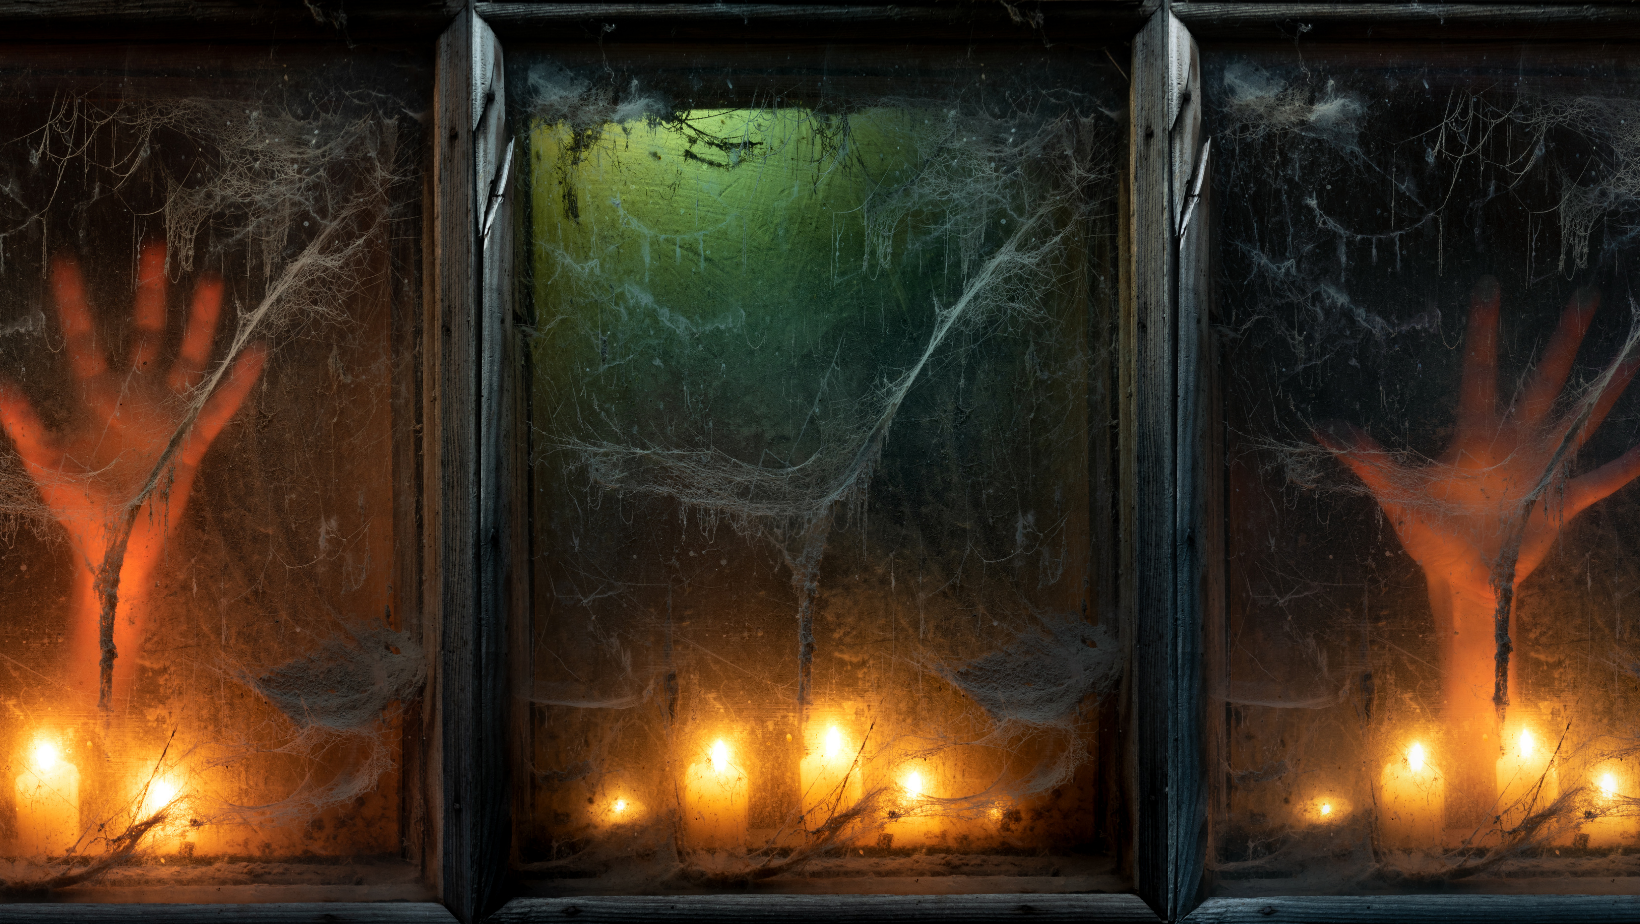 Three windows in a row, all dark. Windows on either end have outstreched hands behind them and lit candles along the sil. Middle window has green light emanating from top and lit candles at the bottom. All windows obscured by cracks & spider webs